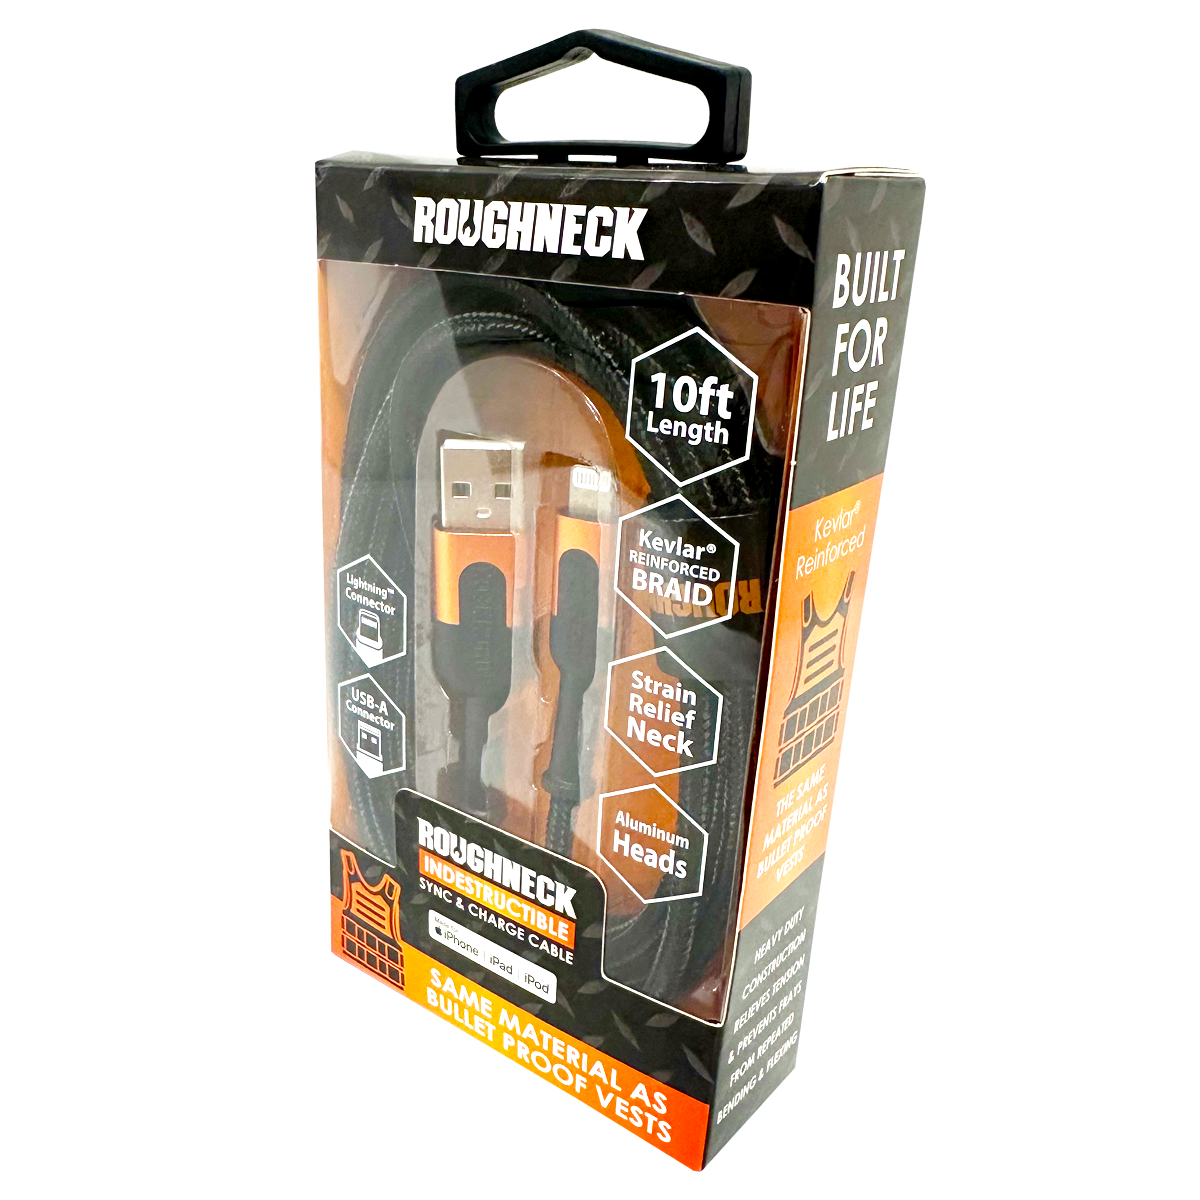 ITEM NUMBER 024569 ROUGHNECK 10FT USB-TO-LIGHTNING CABLE 3 PIECES PER DISPLAY